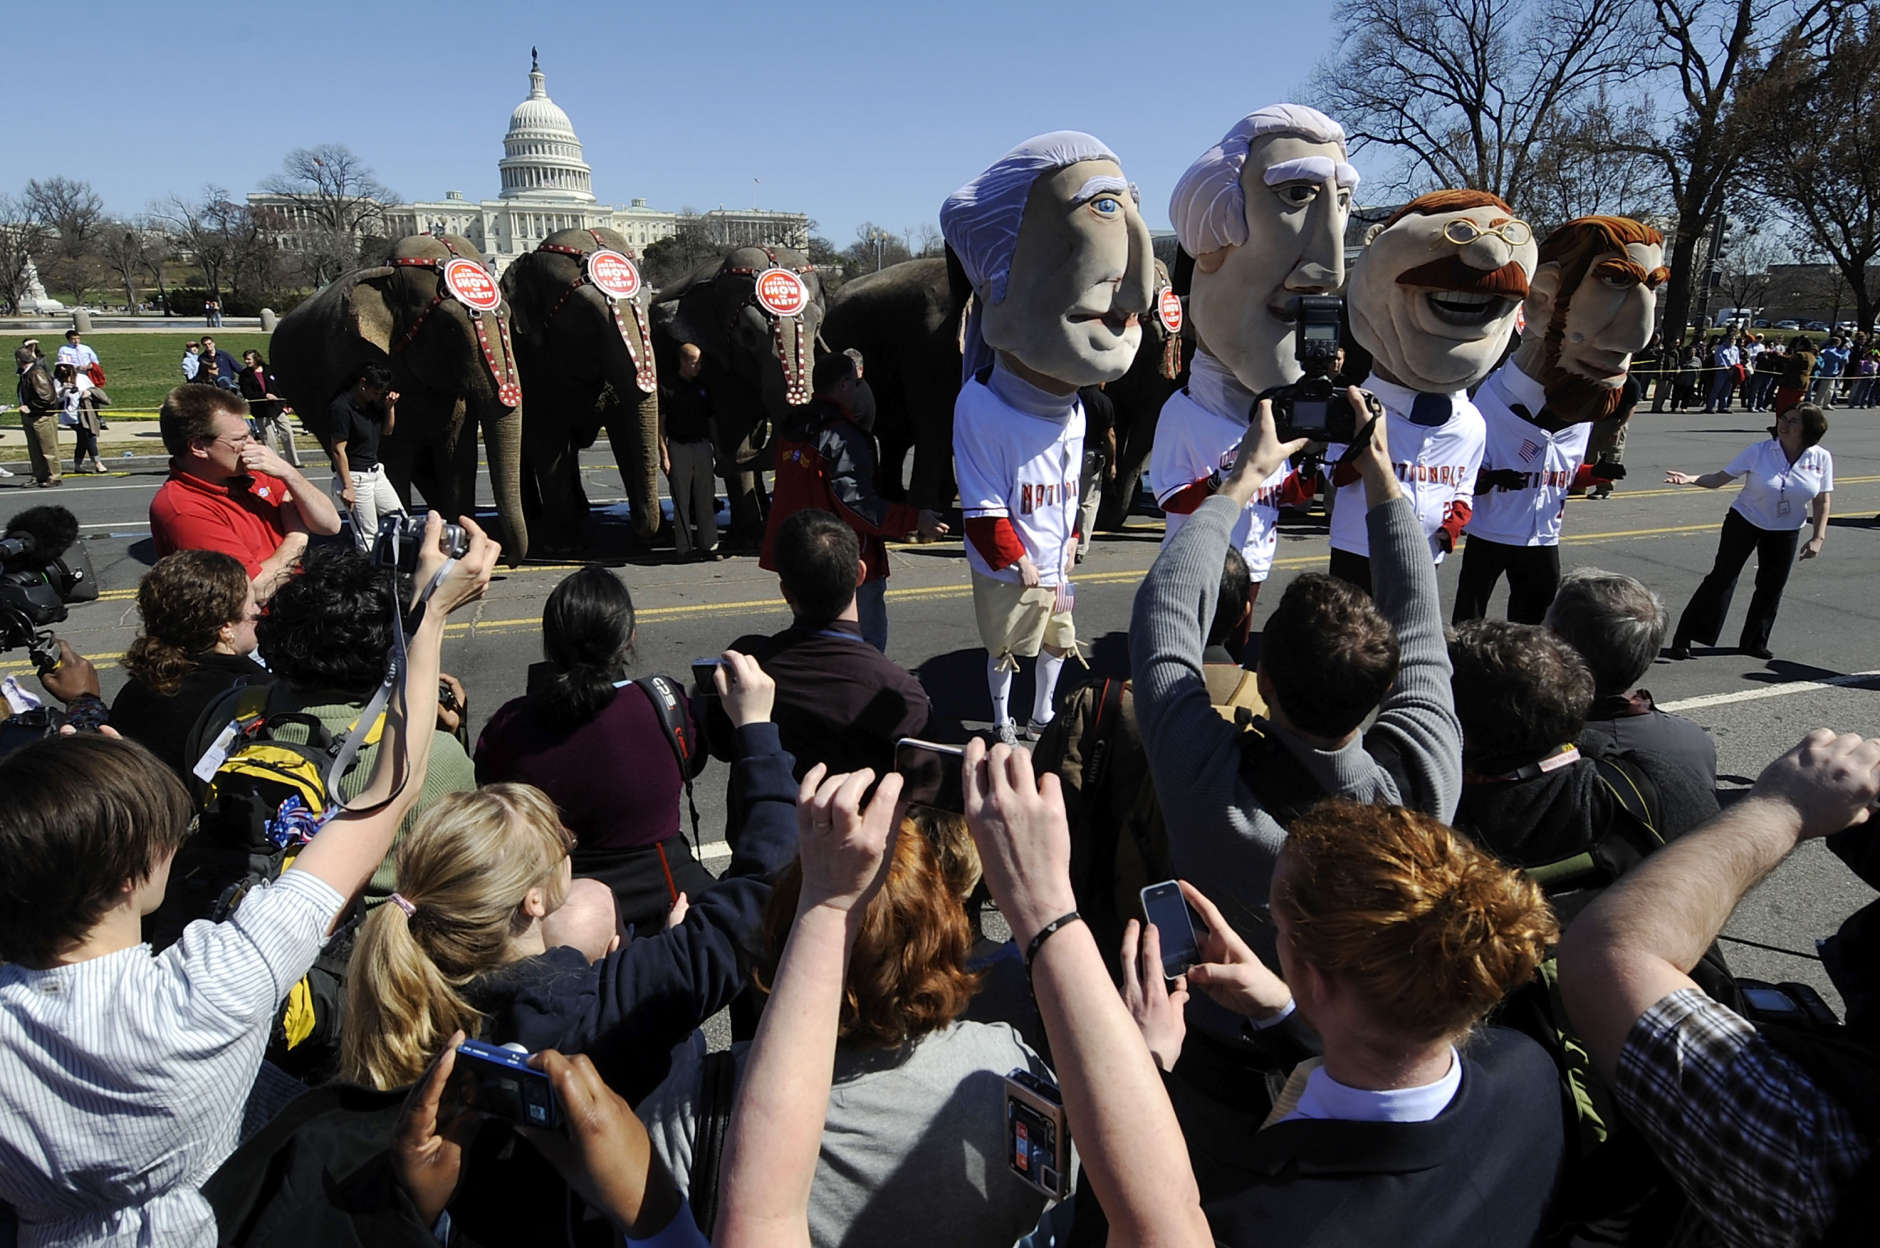 WASHINGTON - MARCH 16:  The Rushmores - mascots for the Washington Nationals MLB baseball team in the guise of former U.S. Presidents George Washington, Thomas Jefferson, Abraham Lincoln and Theodore Roosevelt - get in on the act as elephants from the Ringling Bros. and Barnem &amp; Bailey Circus stop near the U.S. Capitol for a photo op as they parade through town to announce the circus's arrival for performances on March 16, 2010 in Washington, DC. The circus' Zing Zang Zoom Red Tour will be at the Verizon Center from March 18 to March 21.  (Photo by Jonathan Ernst/Getty Images)